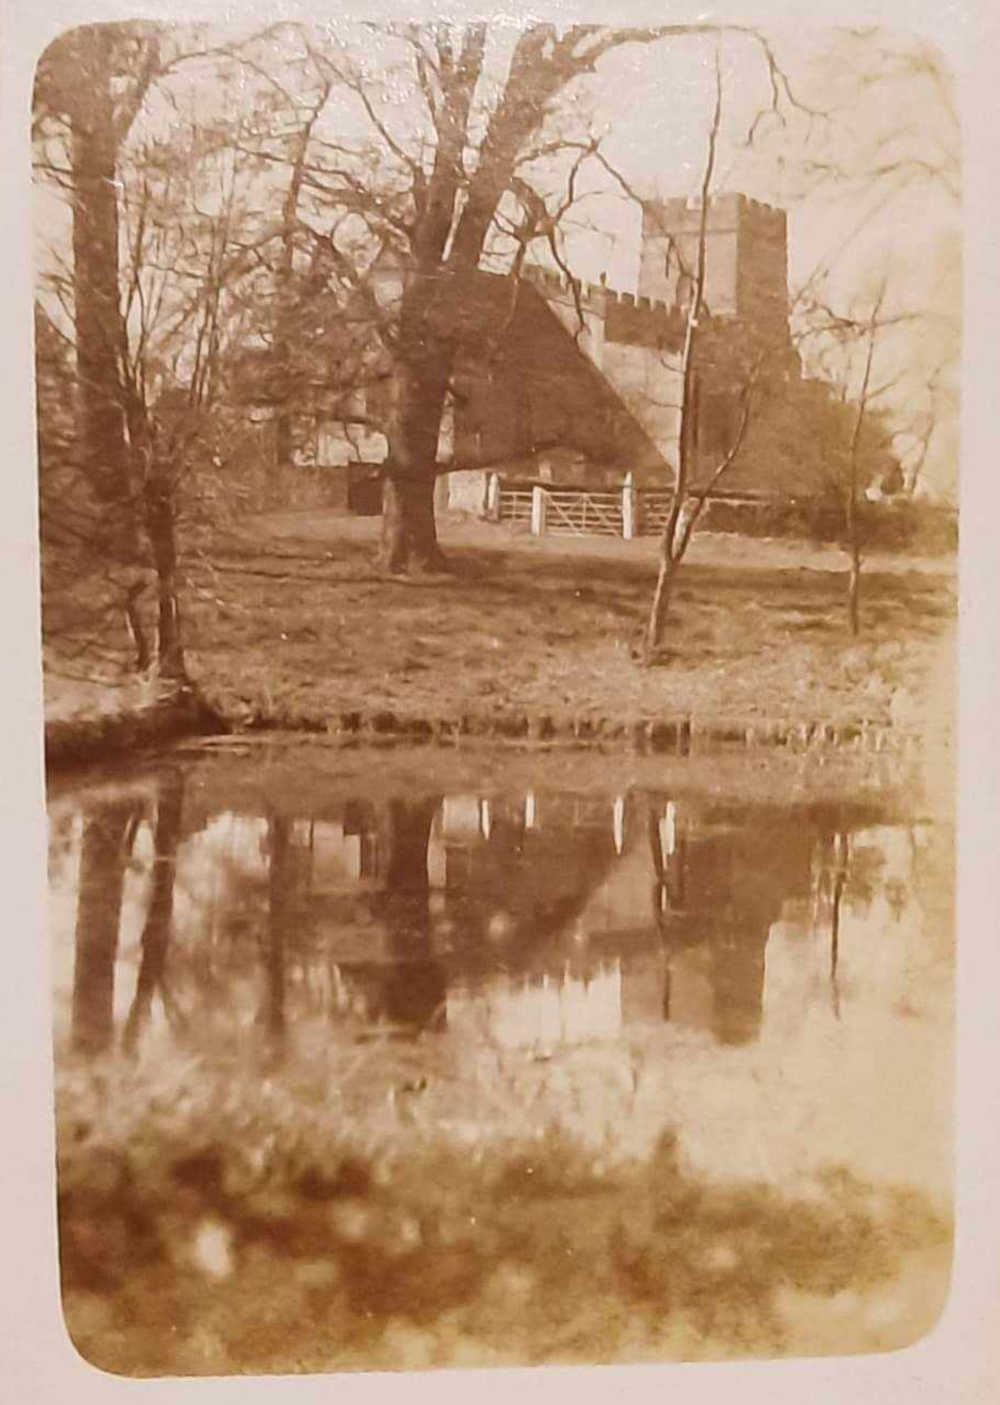 St. Andrew's Church, Great Linford, photographed 1920s by Alfred Harold Oldham.